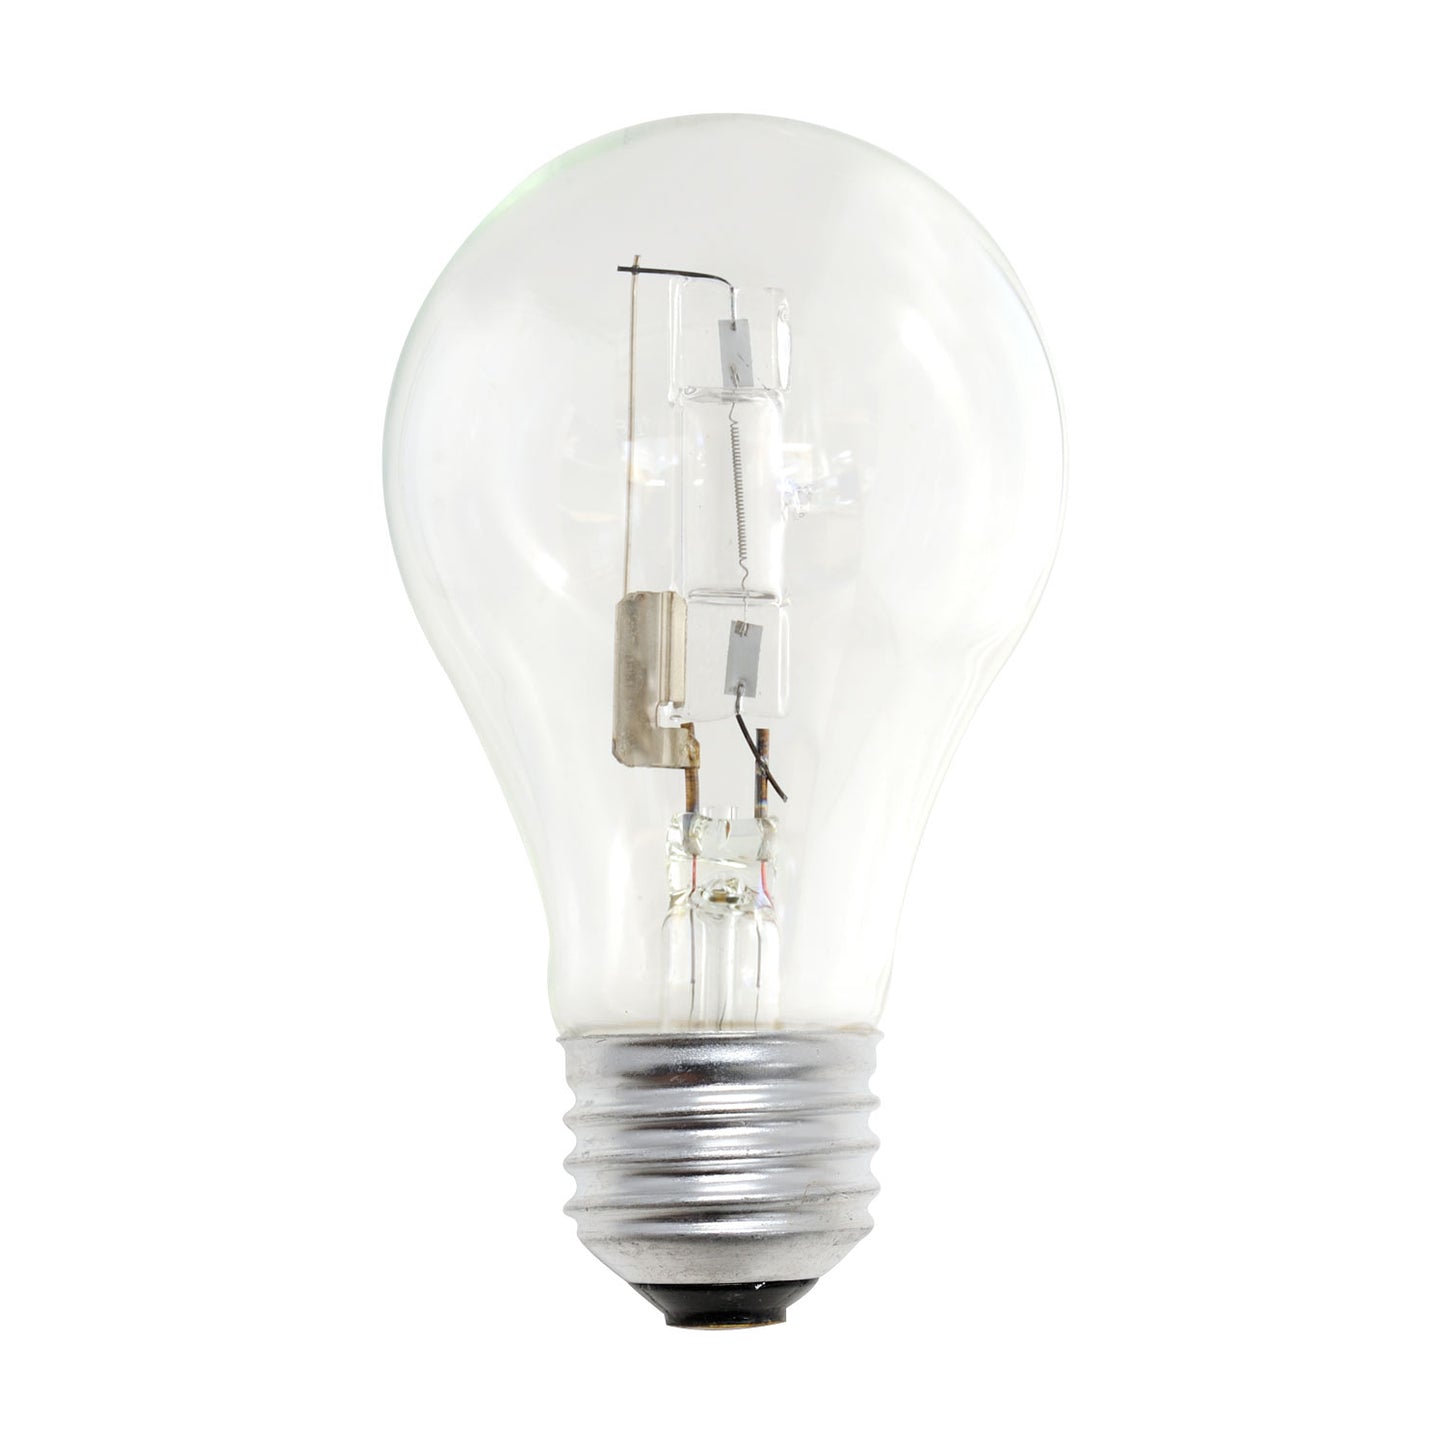 Replacement for Bulbrite 615073 72A/HAL/CL/ECO 72W A19 HALOGEN CLEAR E26 120V - NOW LED